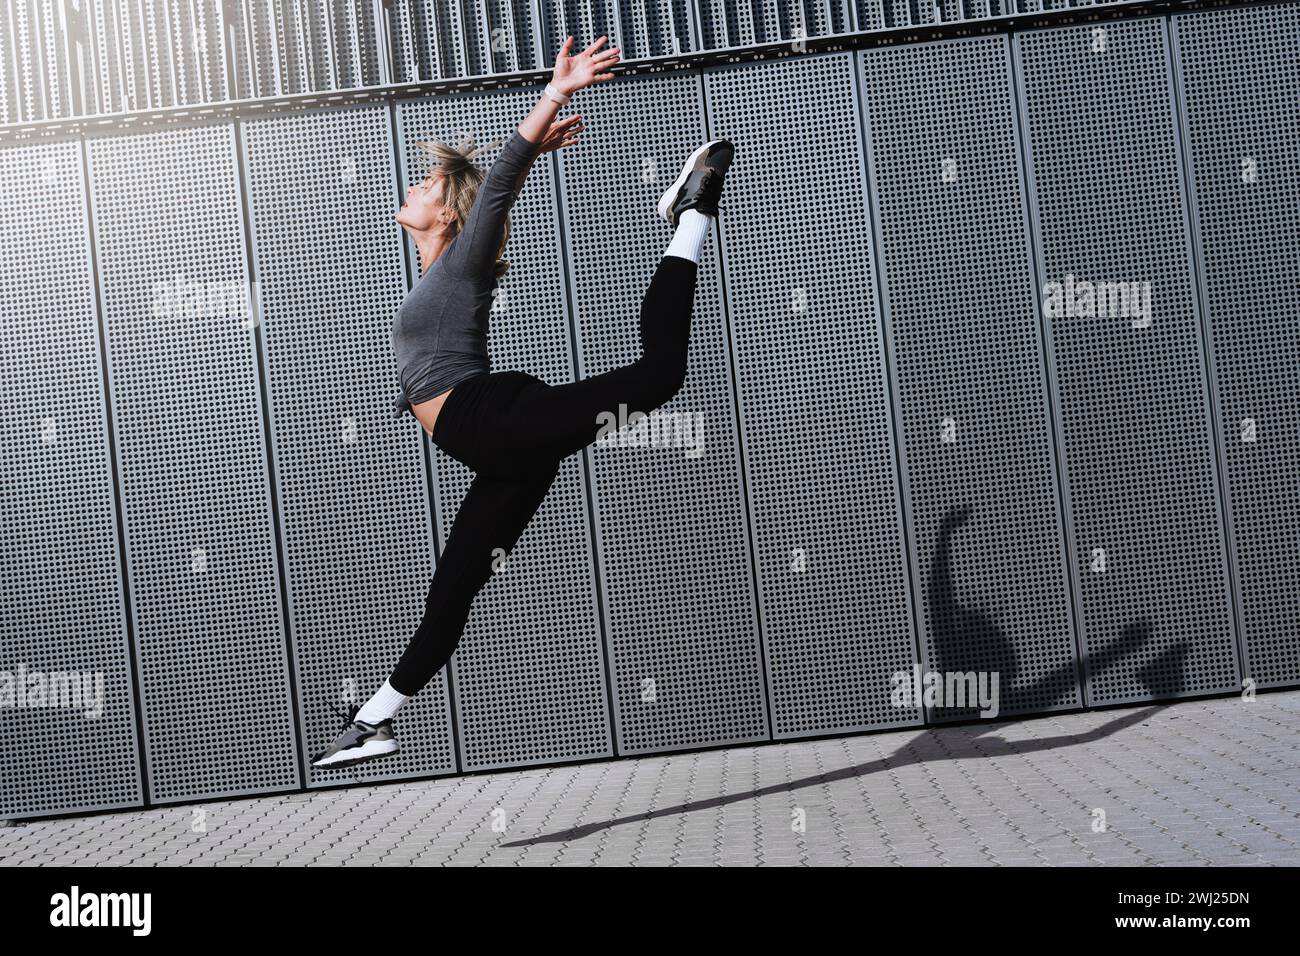 Woman dancer wearing female sportswear performing against  background with modern steel panels Stock Photo